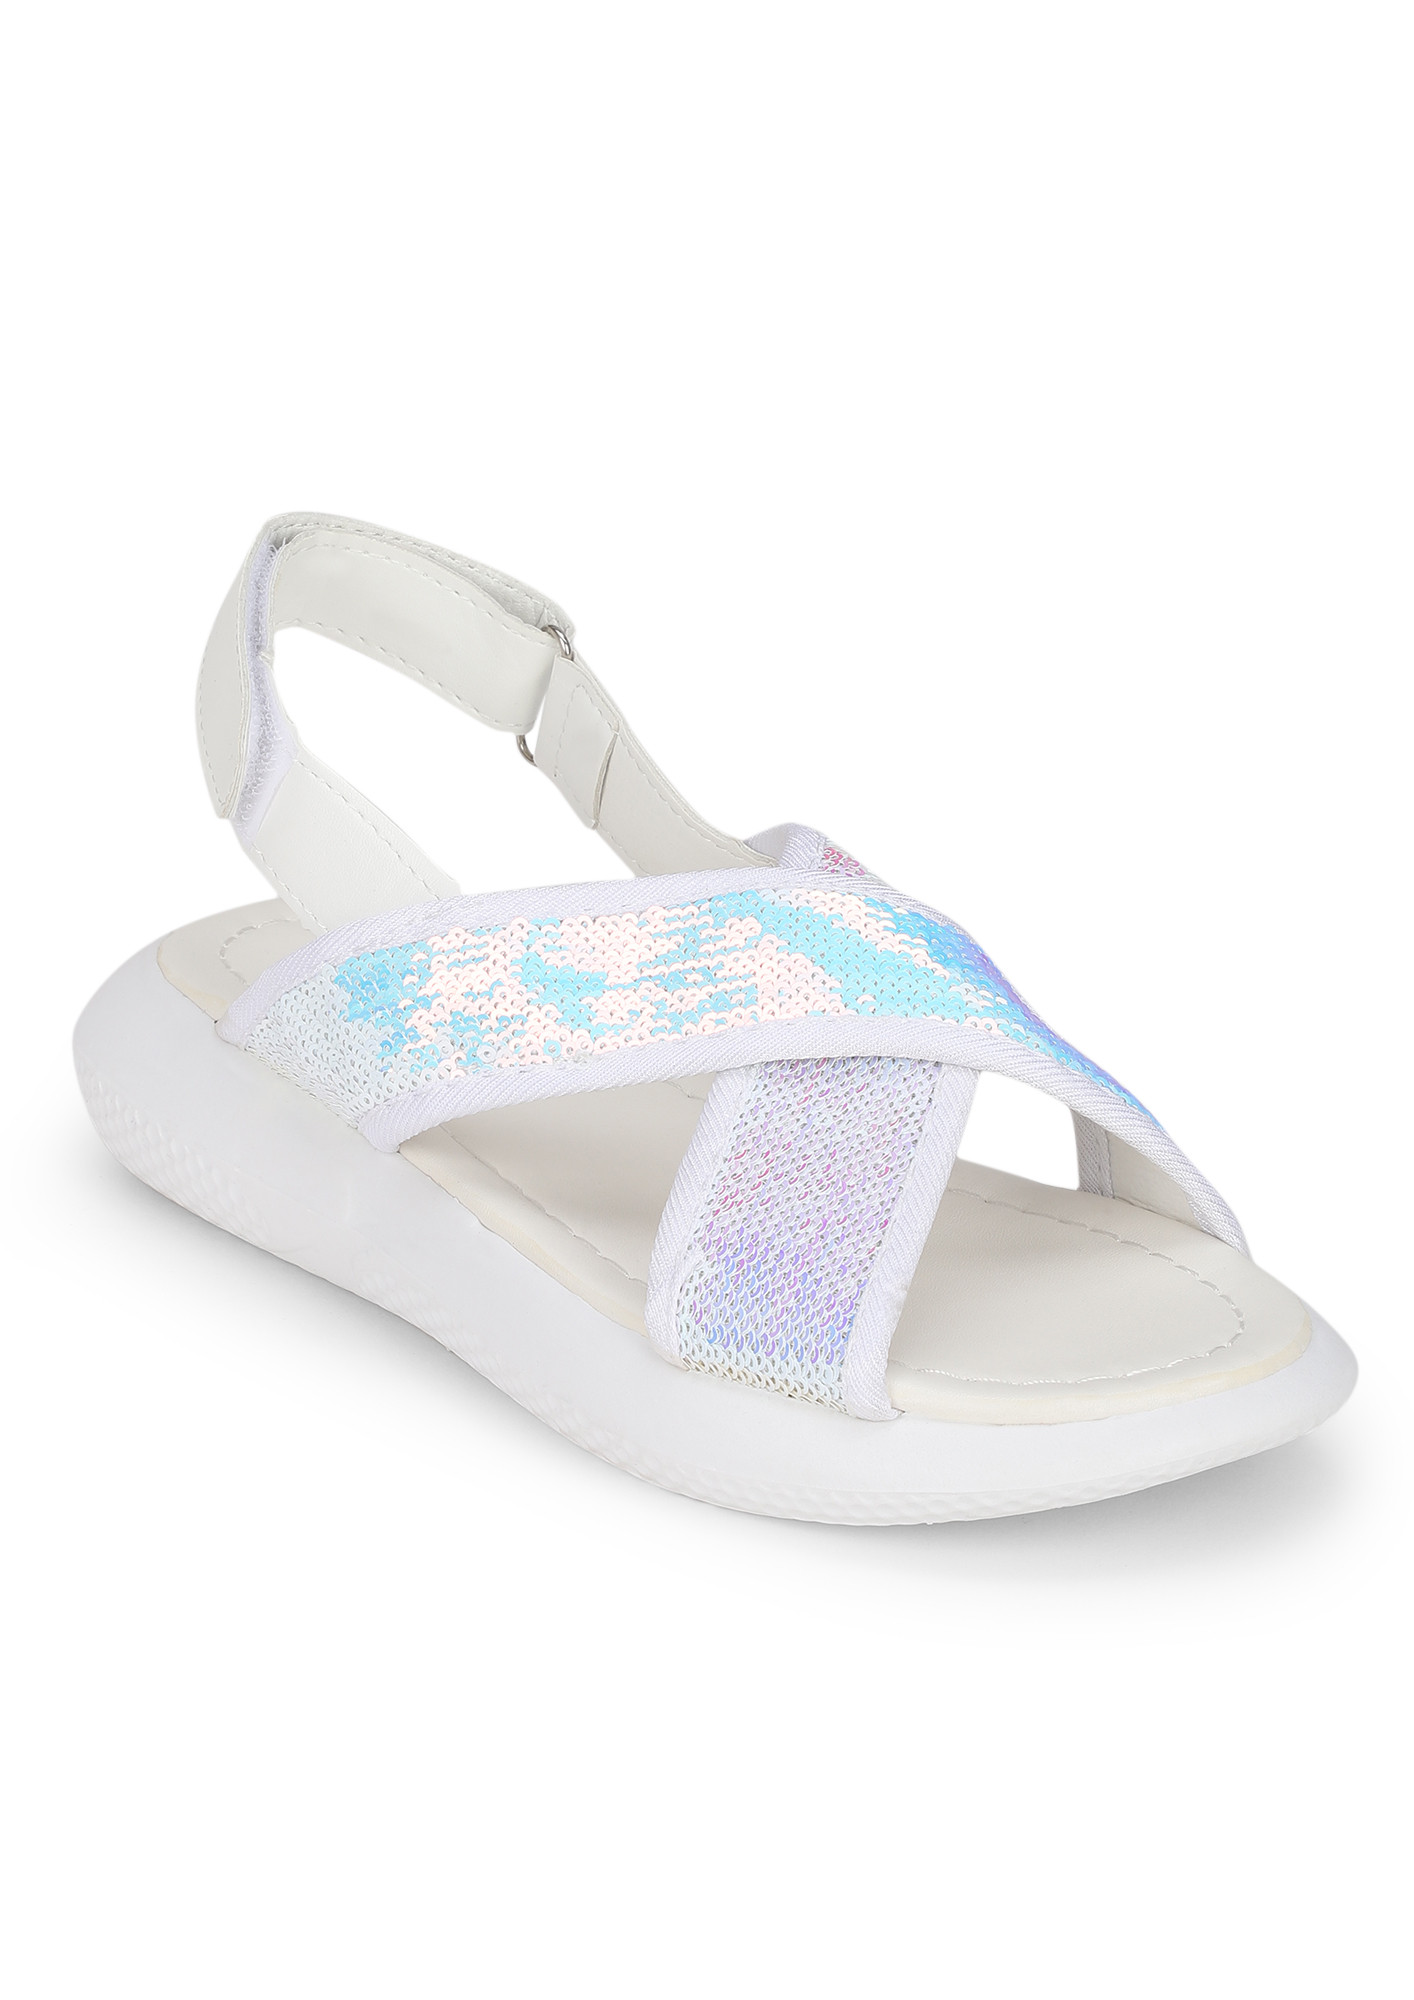 SPRINKLING SEQUINS EVERYWHERE WHITE FLAT SANDALS